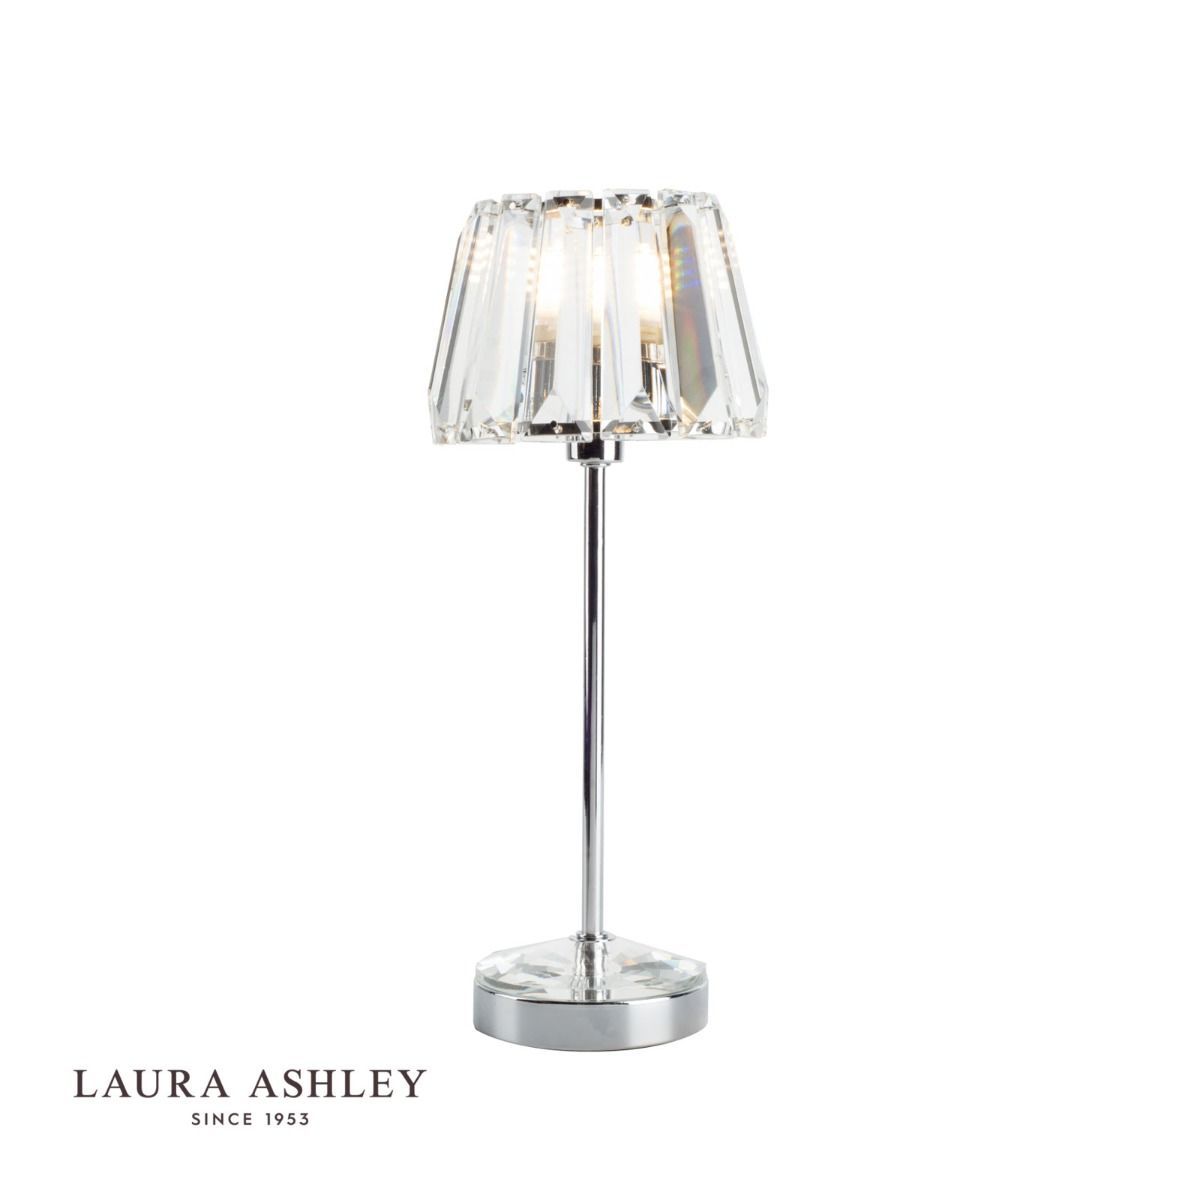 Laura Ashley Capri Small Table Lamp, Small Black Table Lamp With White Shade